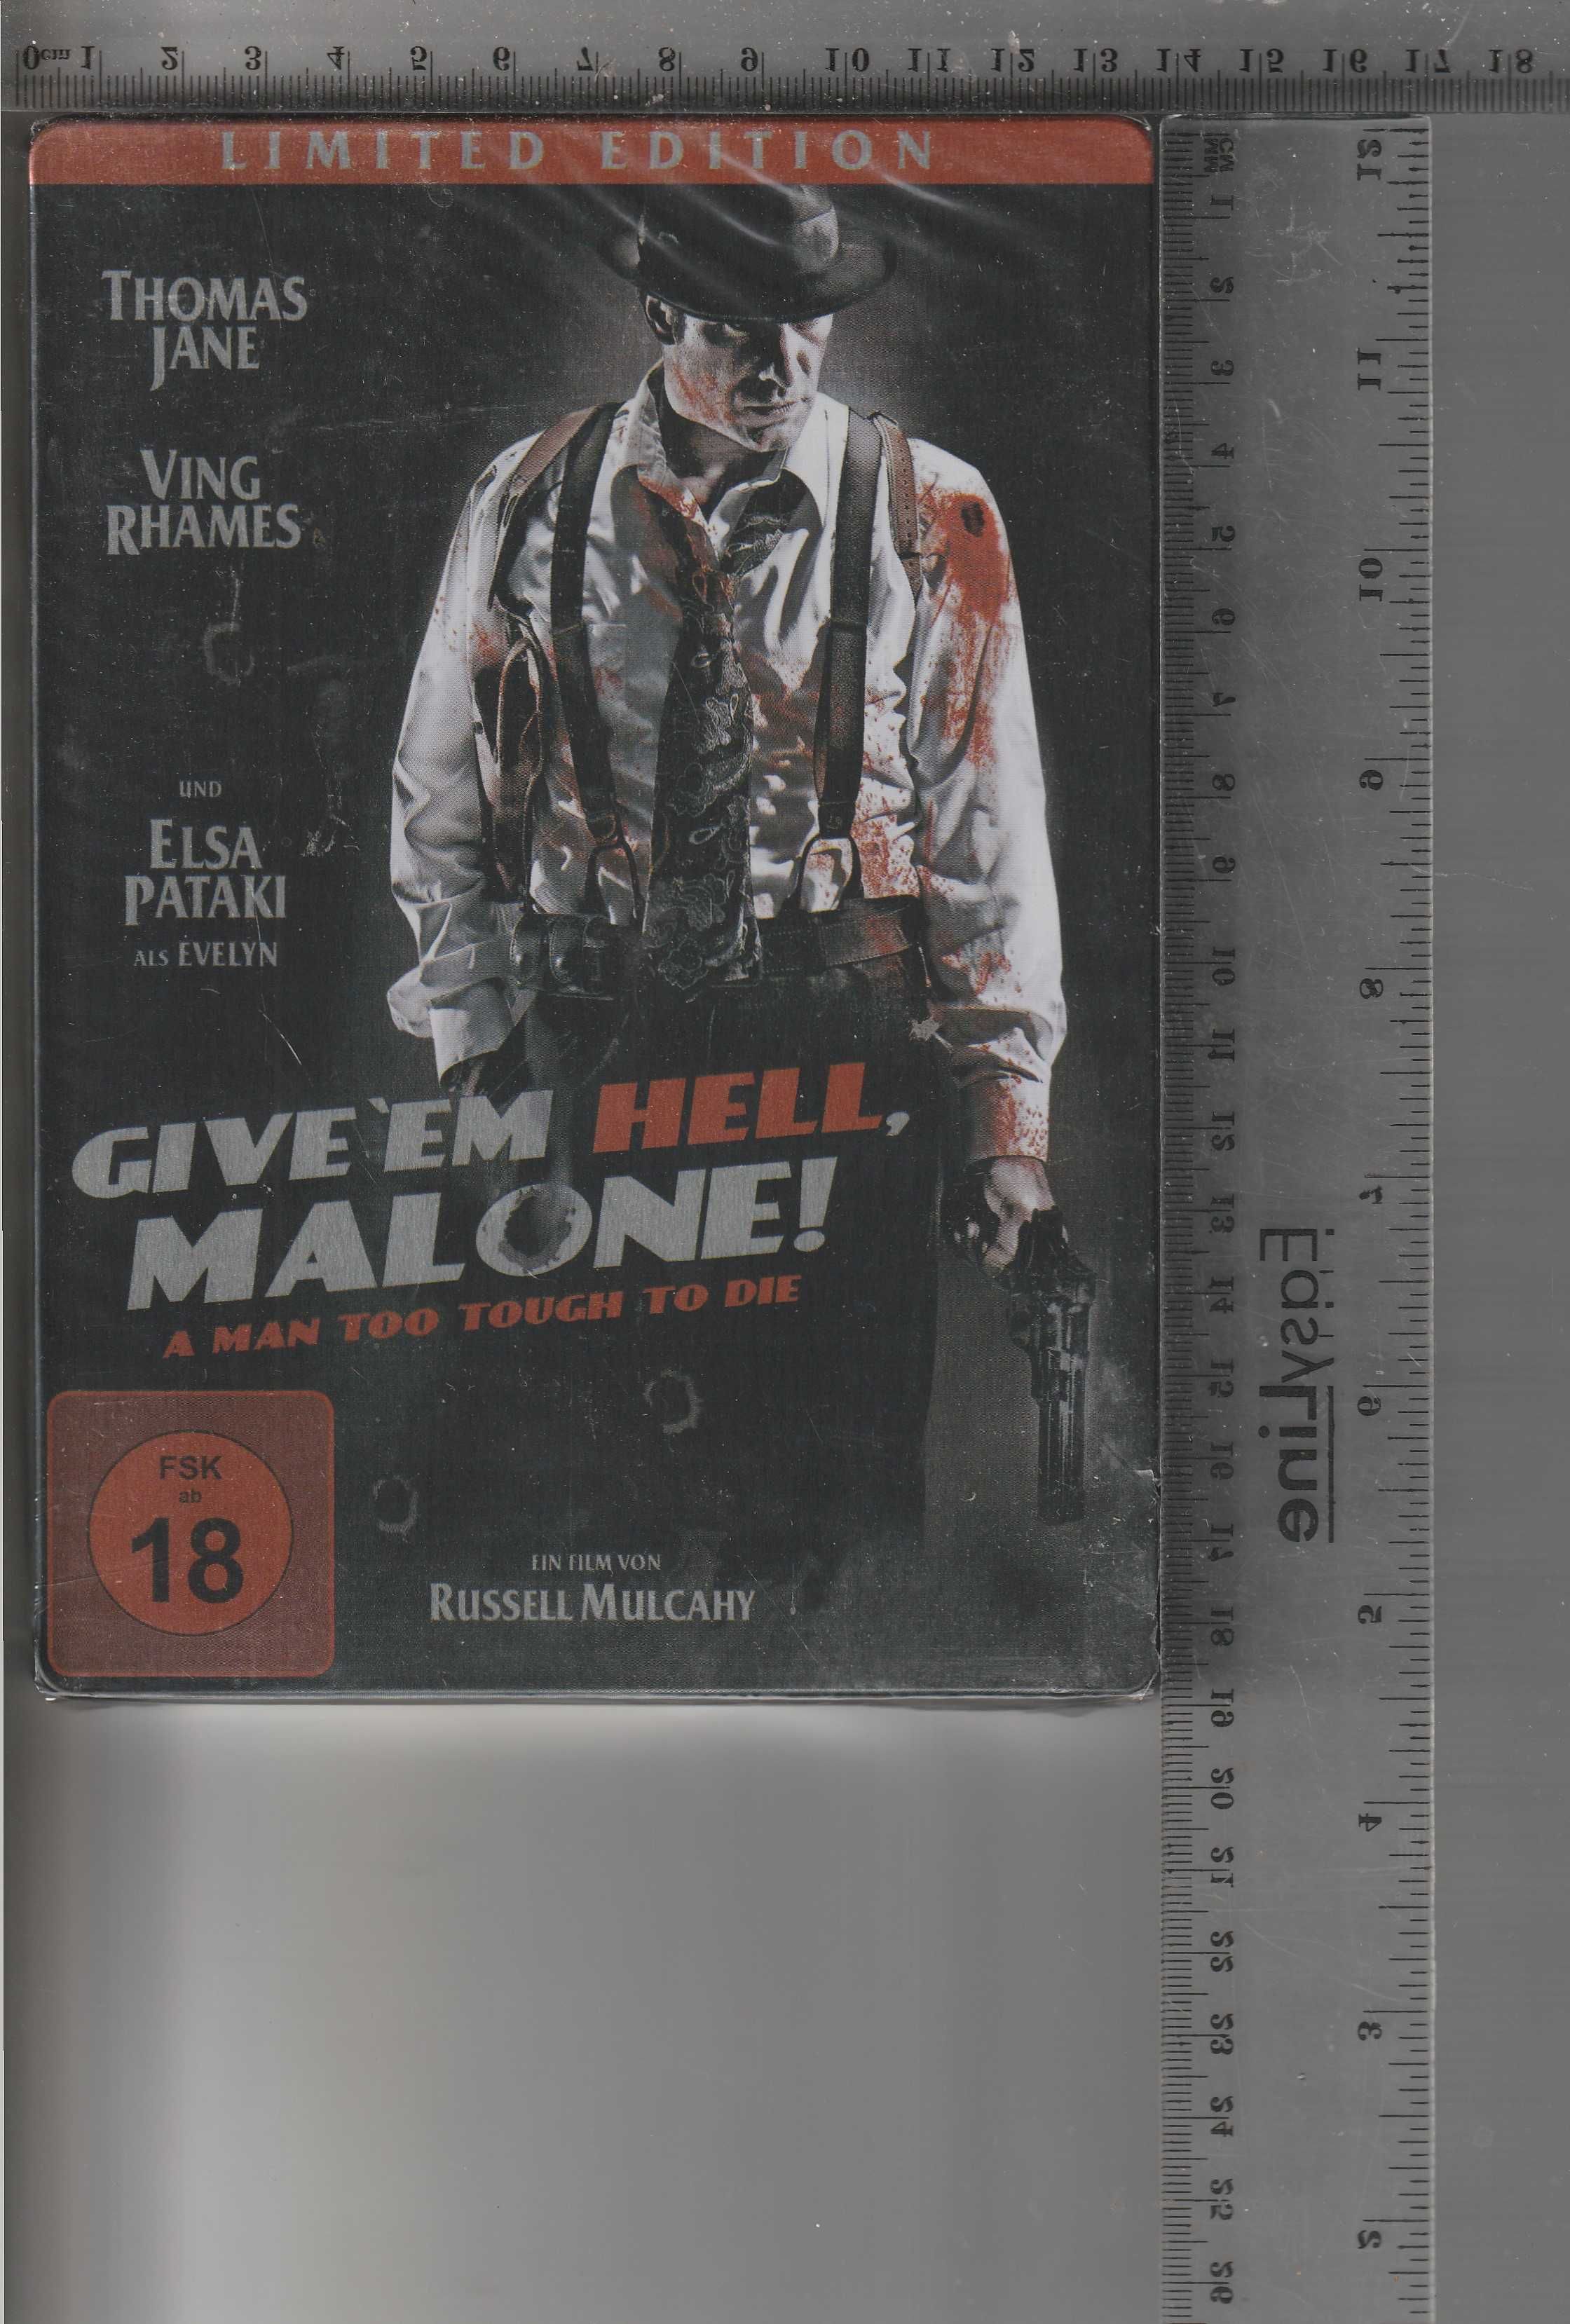 Give'em hell Malone Limited edition DVD